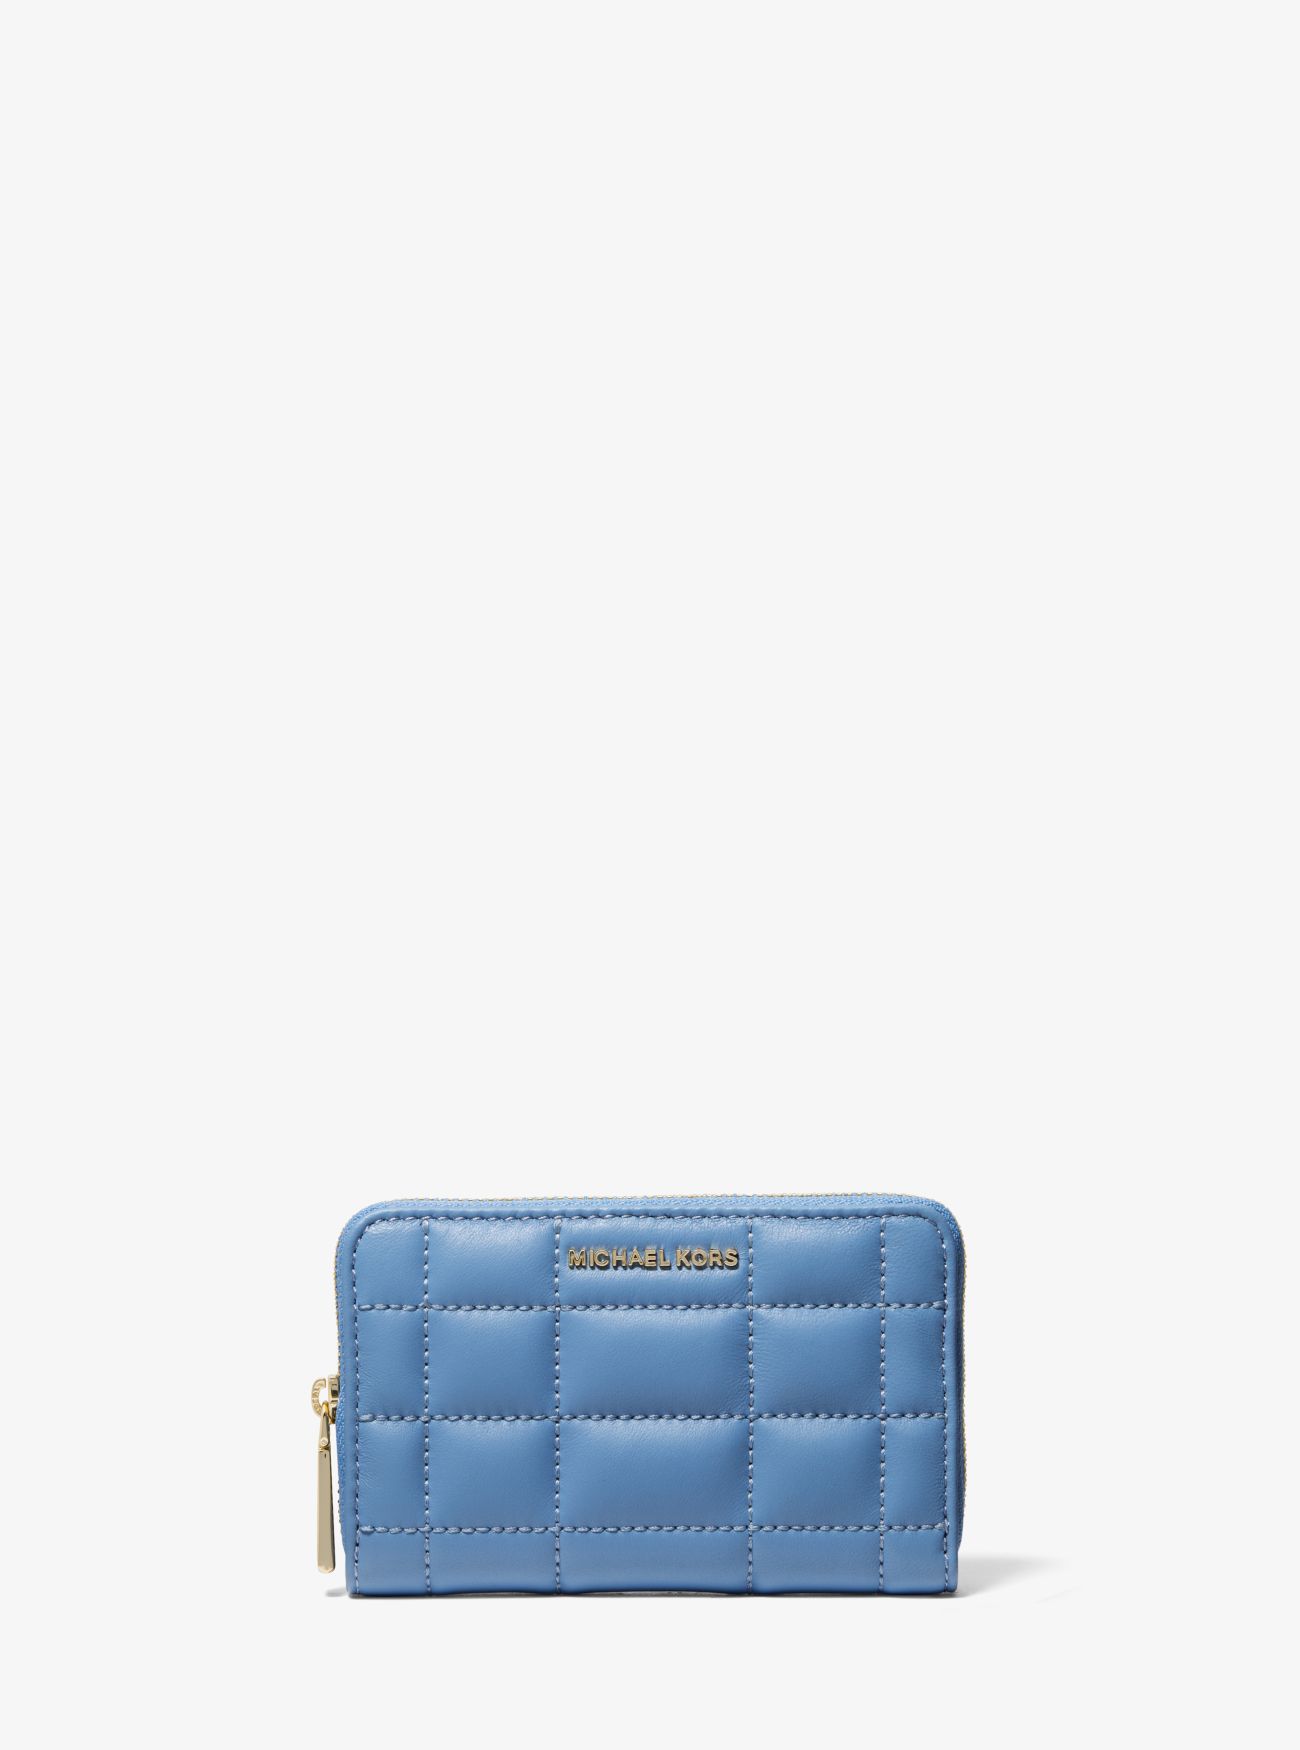 MK Small Quilted Leather Wallet - Blue - Michael Kors